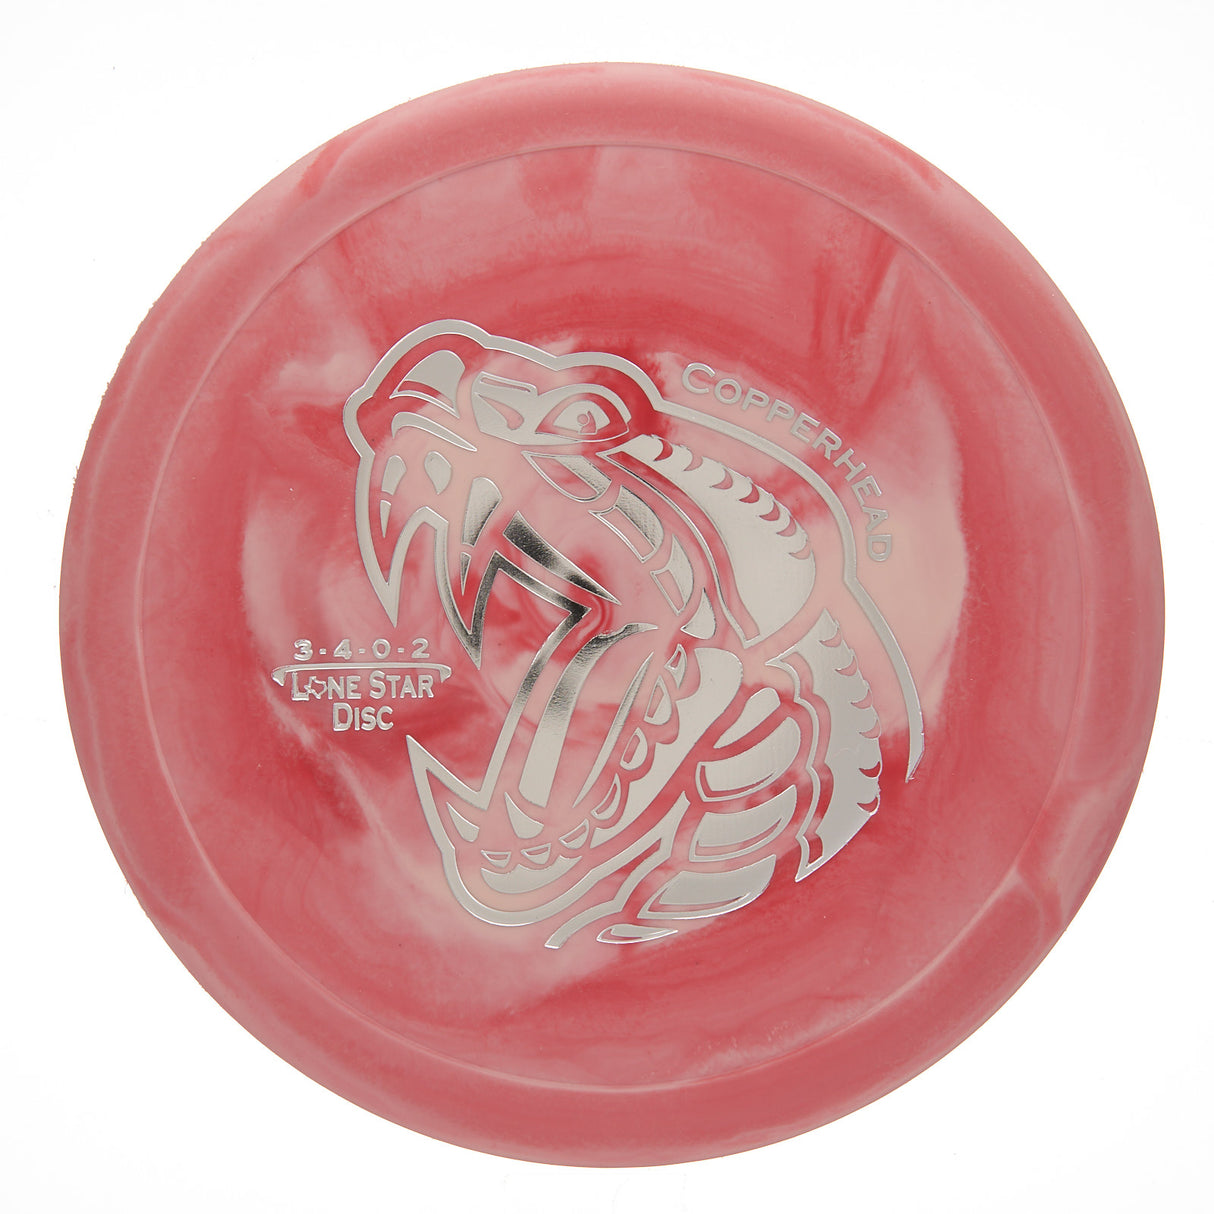 Lone Star Disc Copperhead - Artist Series Victor 2 170g | Style 0002